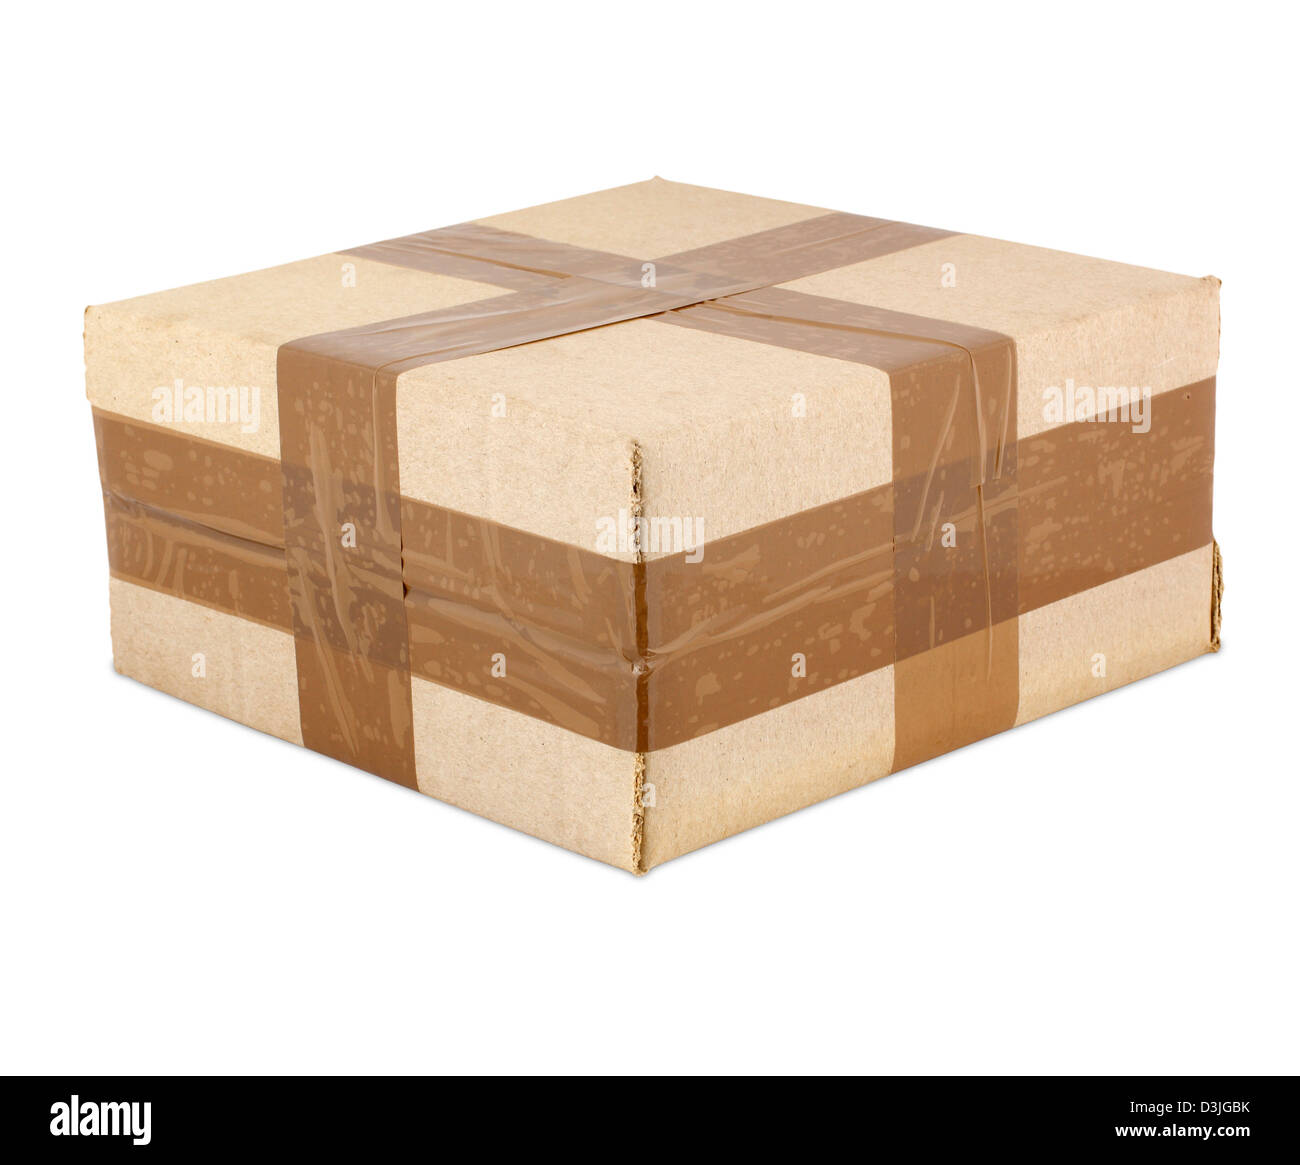 Red Box Round Hat Box Open And Closed Empty Carton Stock Illustration -  Download Image Now - iStock